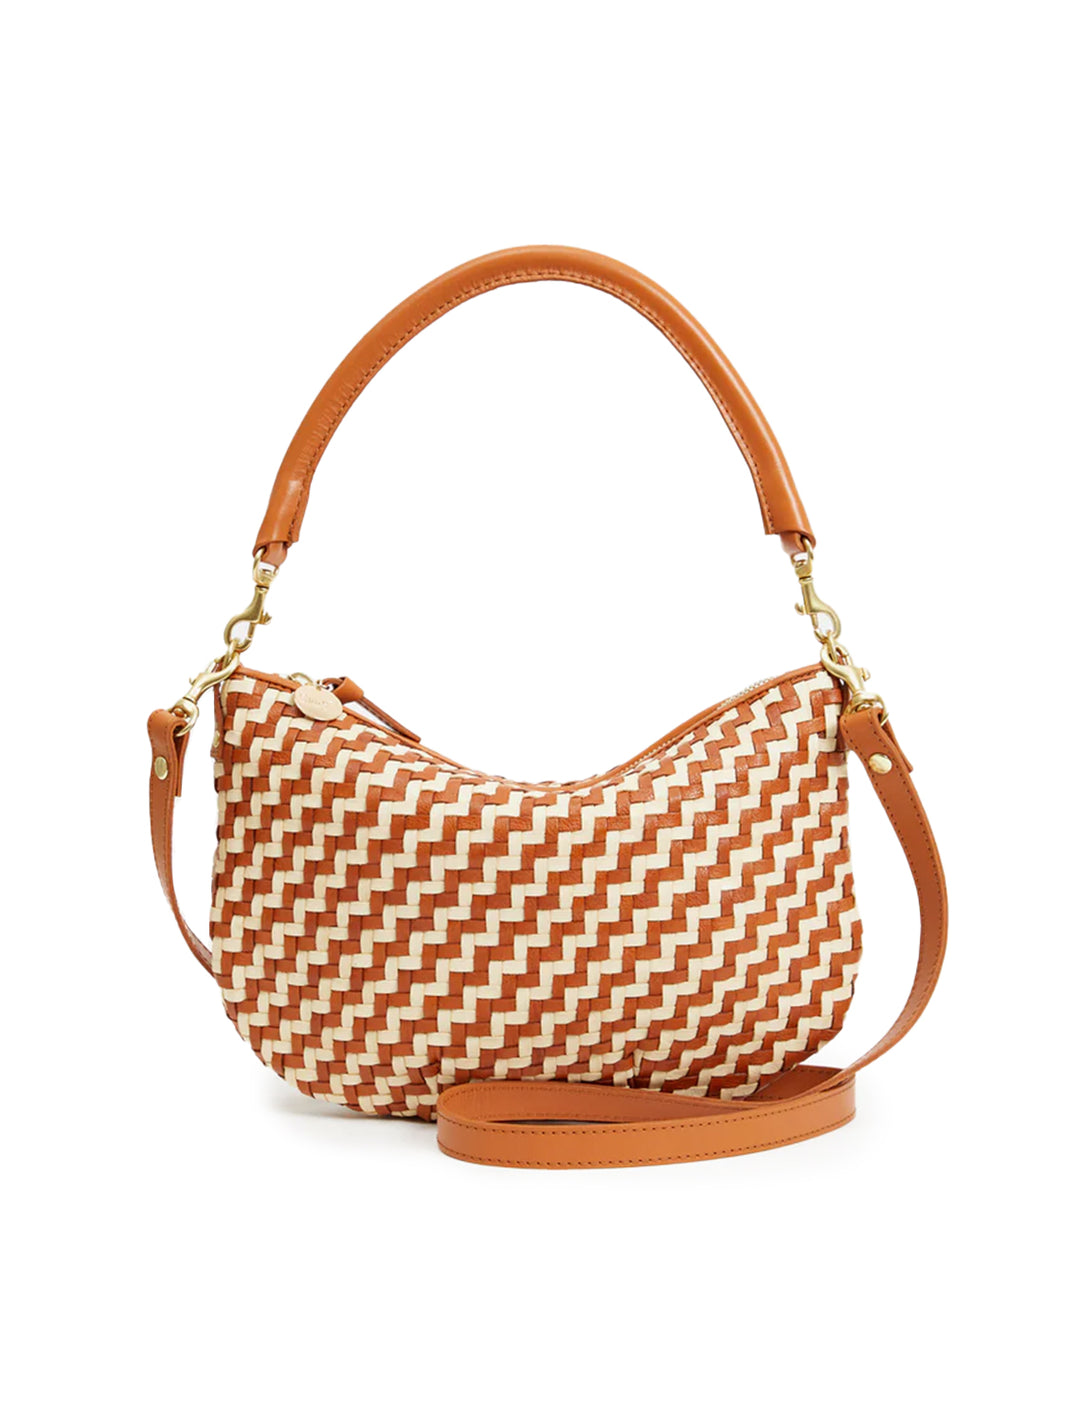 Front view of Clare V.'s petite moyen messenger in natural and cream woven zig zag.